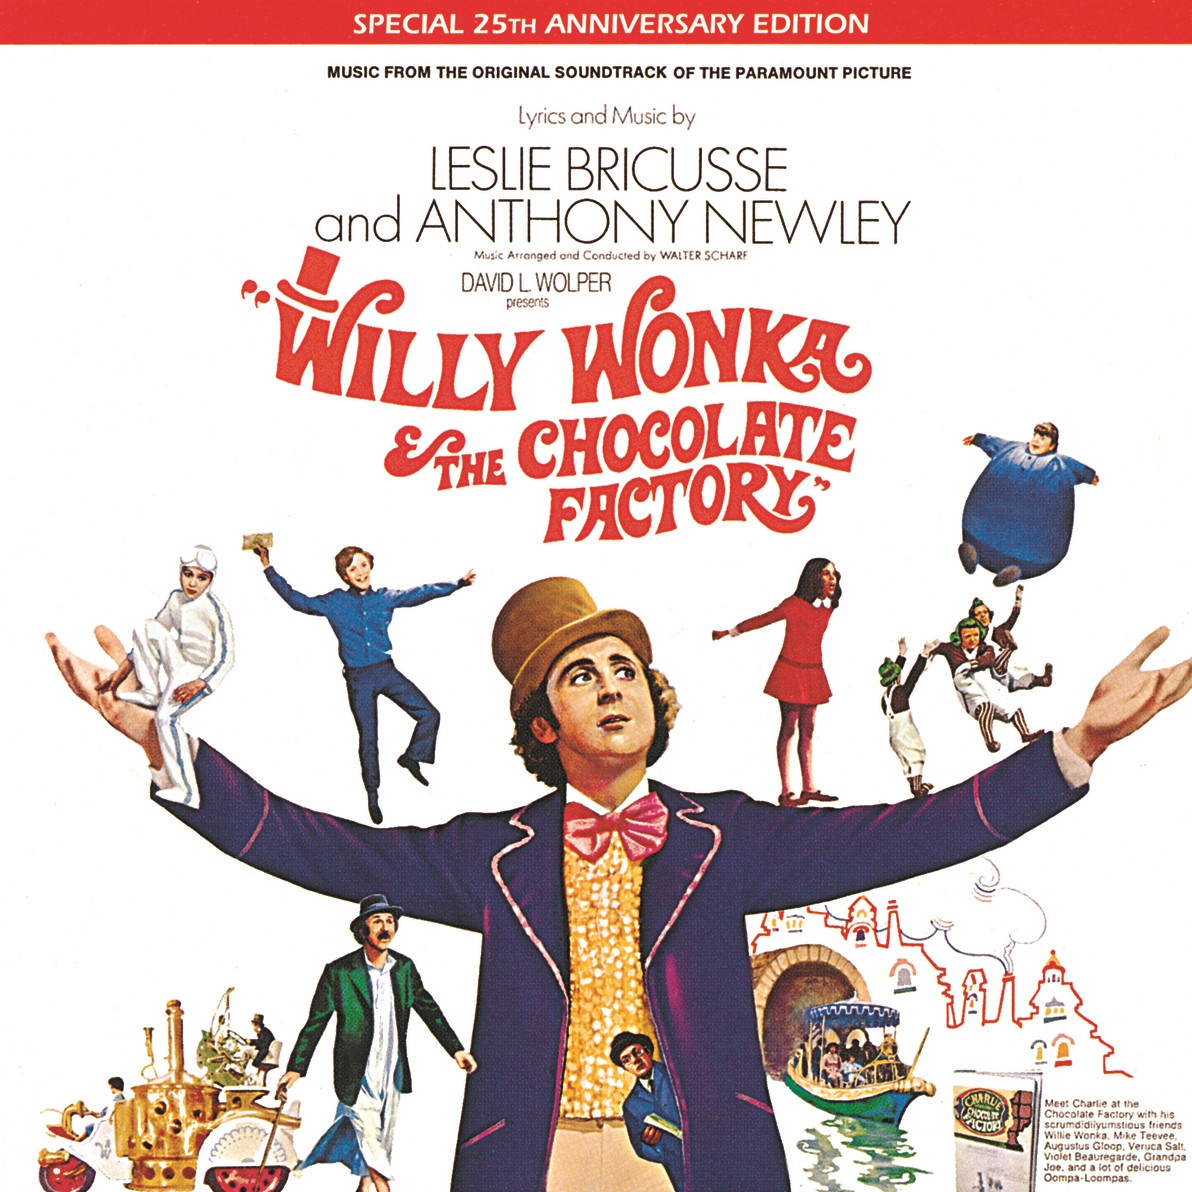 The Bubble Machine - Willy Wonka & The Chocolate Factory/Soundtrack Version